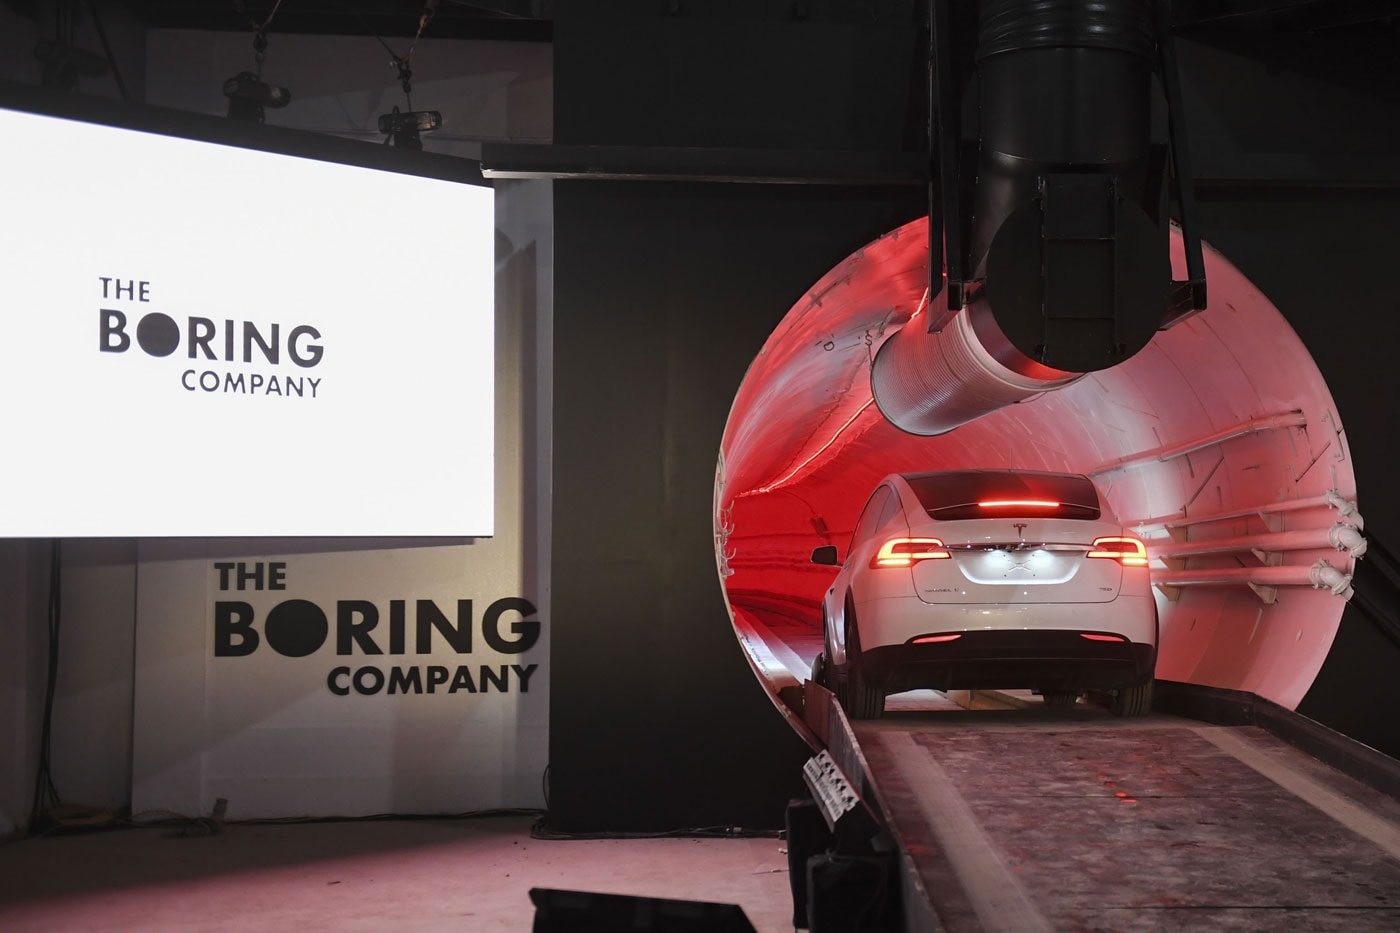 The boring company elon musk build a 34 mile tunnel network under las vegas receives approval vegas loop 55 stations 2023 